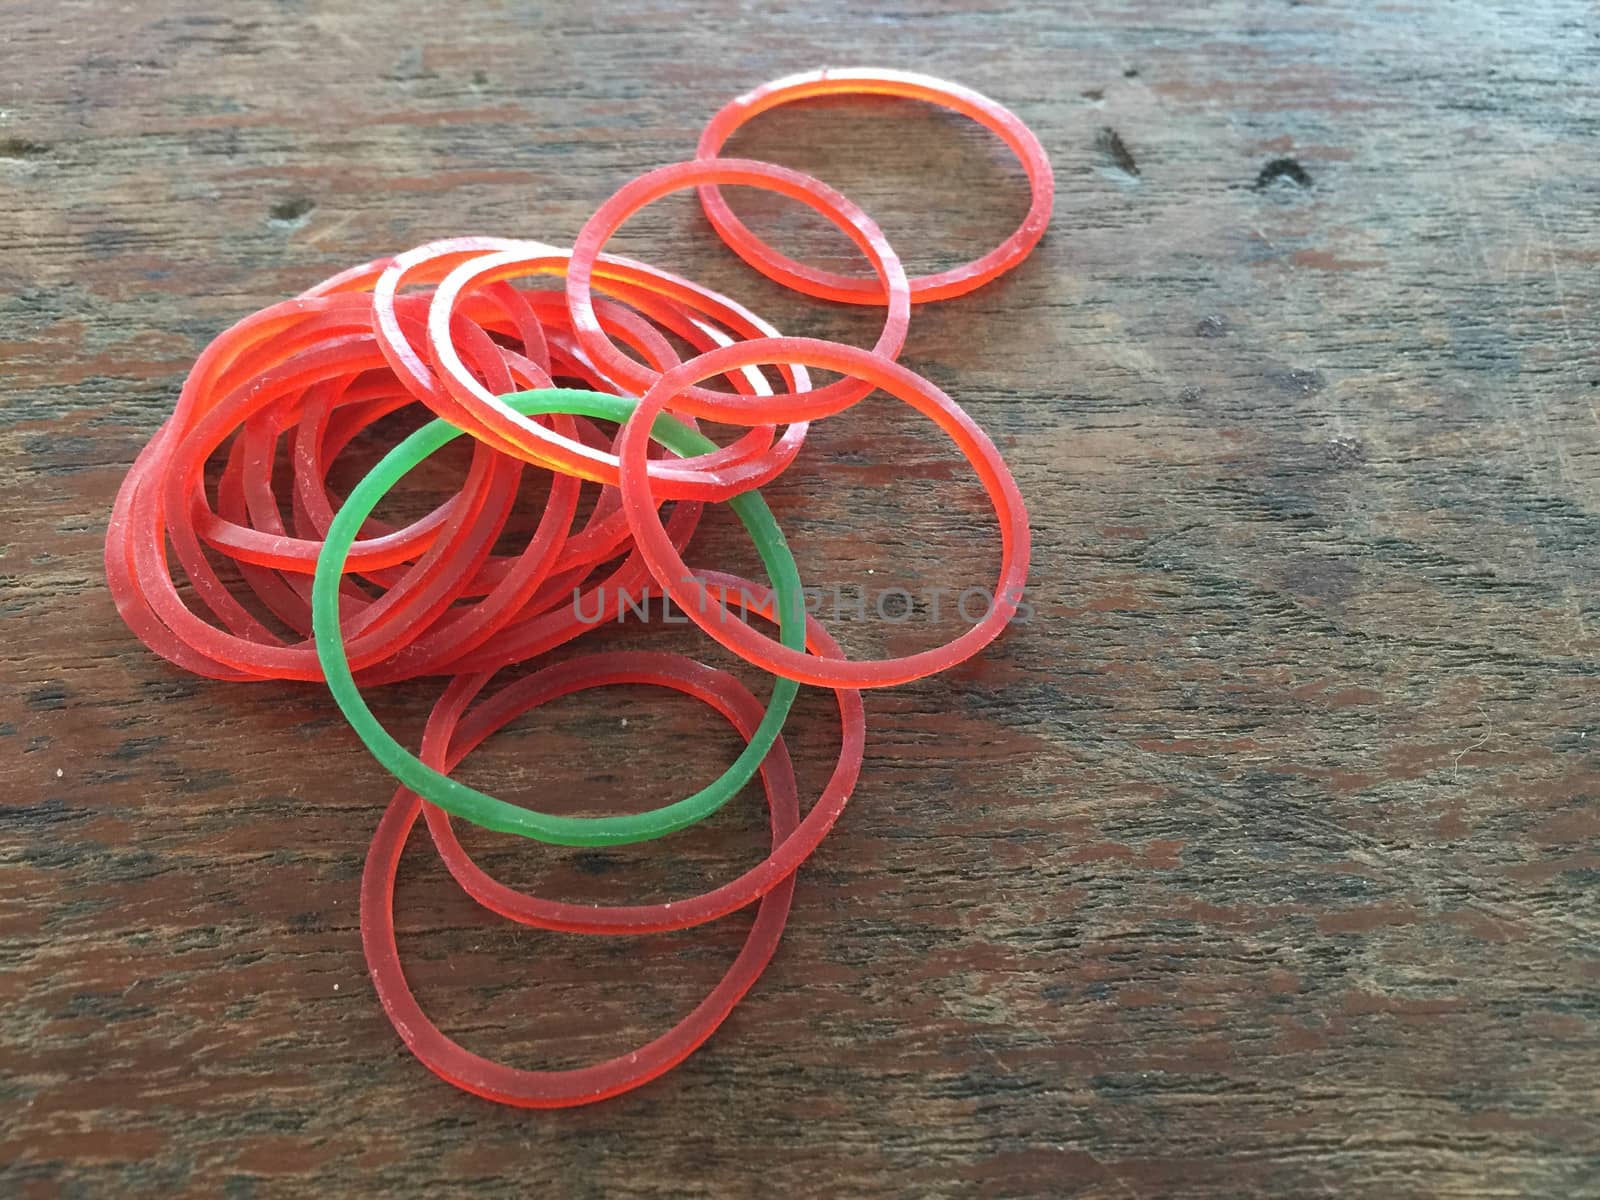 The color of the rubber band